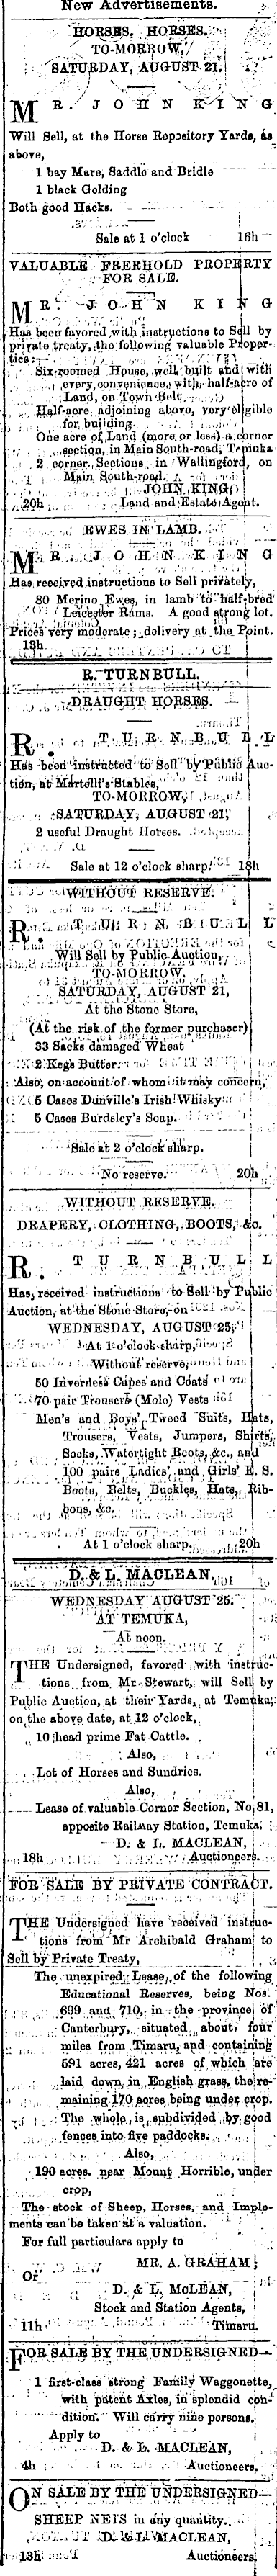 Papers Past Newspapers Timaru Herald August 1875 Page 2 Advertisements Column 2